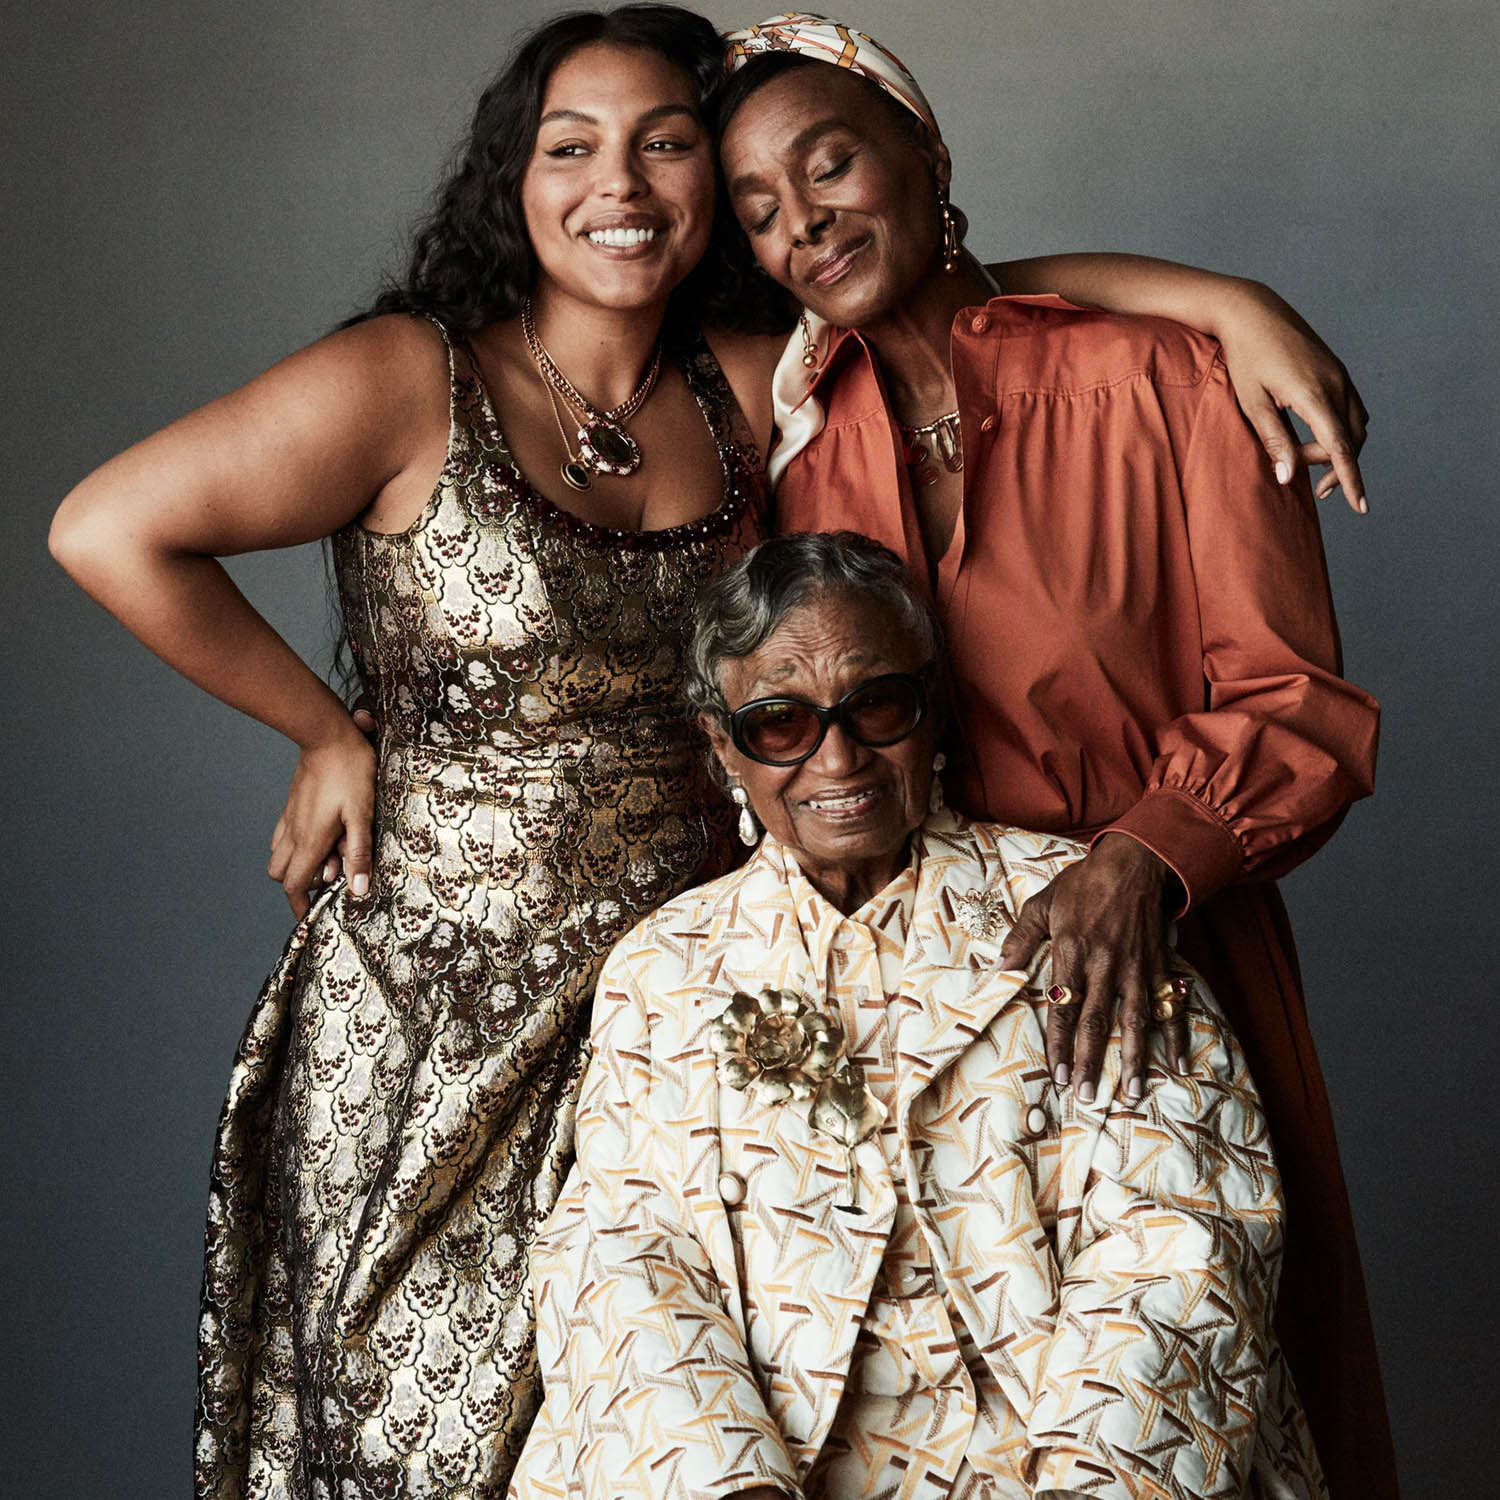 Paloma Elsesser and her family by Daniel Jackson for Vogue US June July 2021